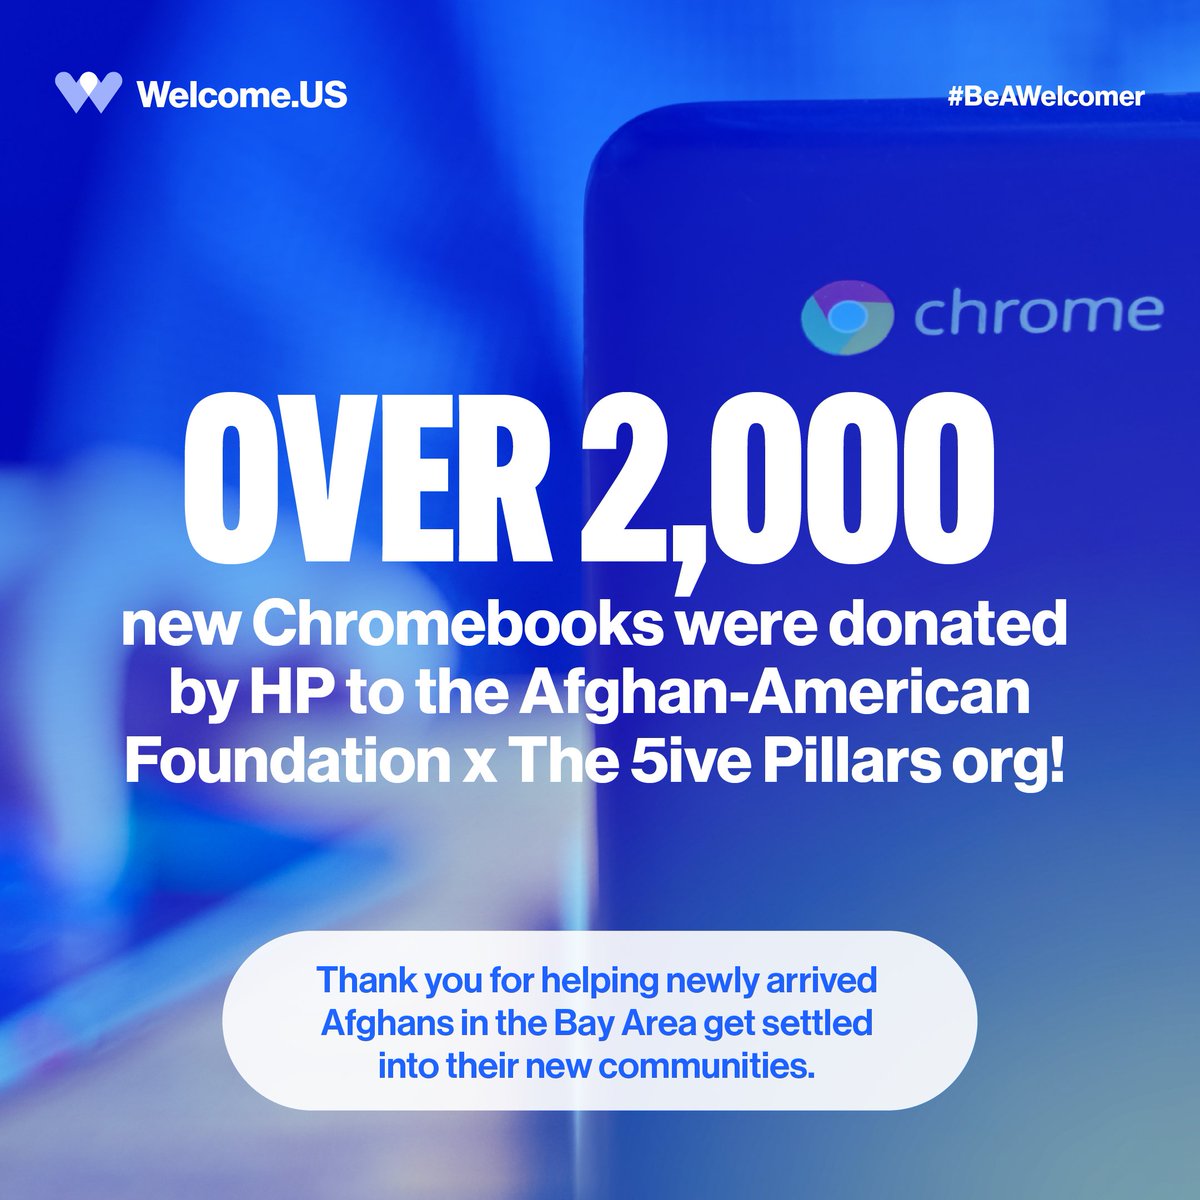 .@HP put laptops in the hands of @Afghan_American and @the5ivepillars to service the Bay Area through an impactful donation of Chromebooks.

Thank you to @HP for their invaluable help in equipping newcomers with the technology they need to thrive in America!

#BeAWelcomer